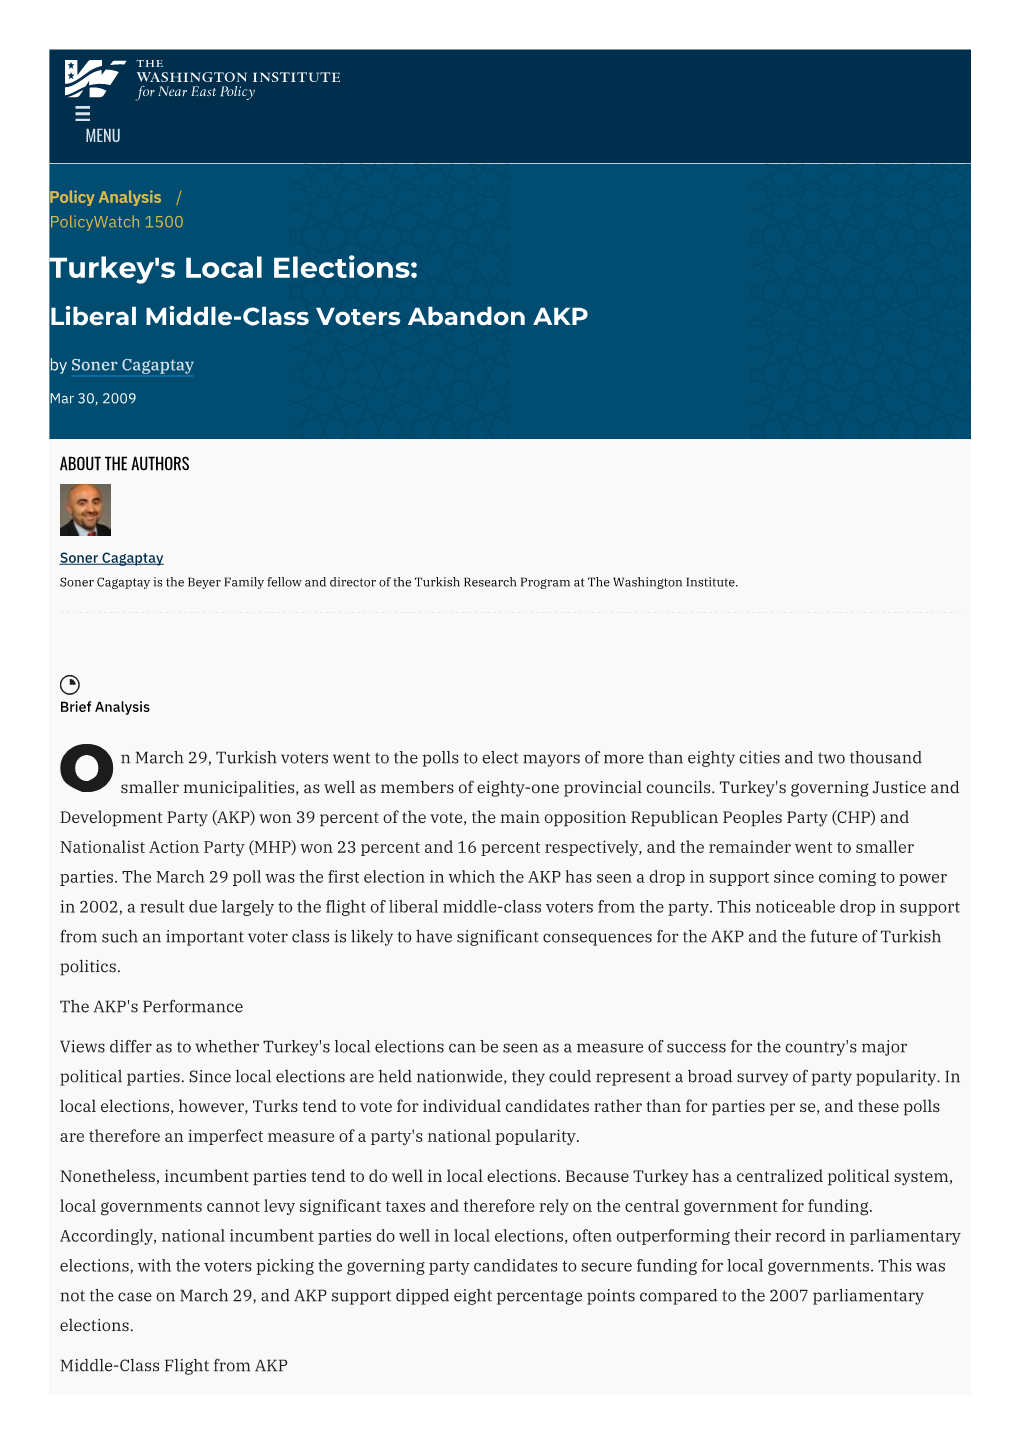 Turkey's Local Elections: Liberal Middle-Class Voters Abandon AKP by Soner Cagaptay